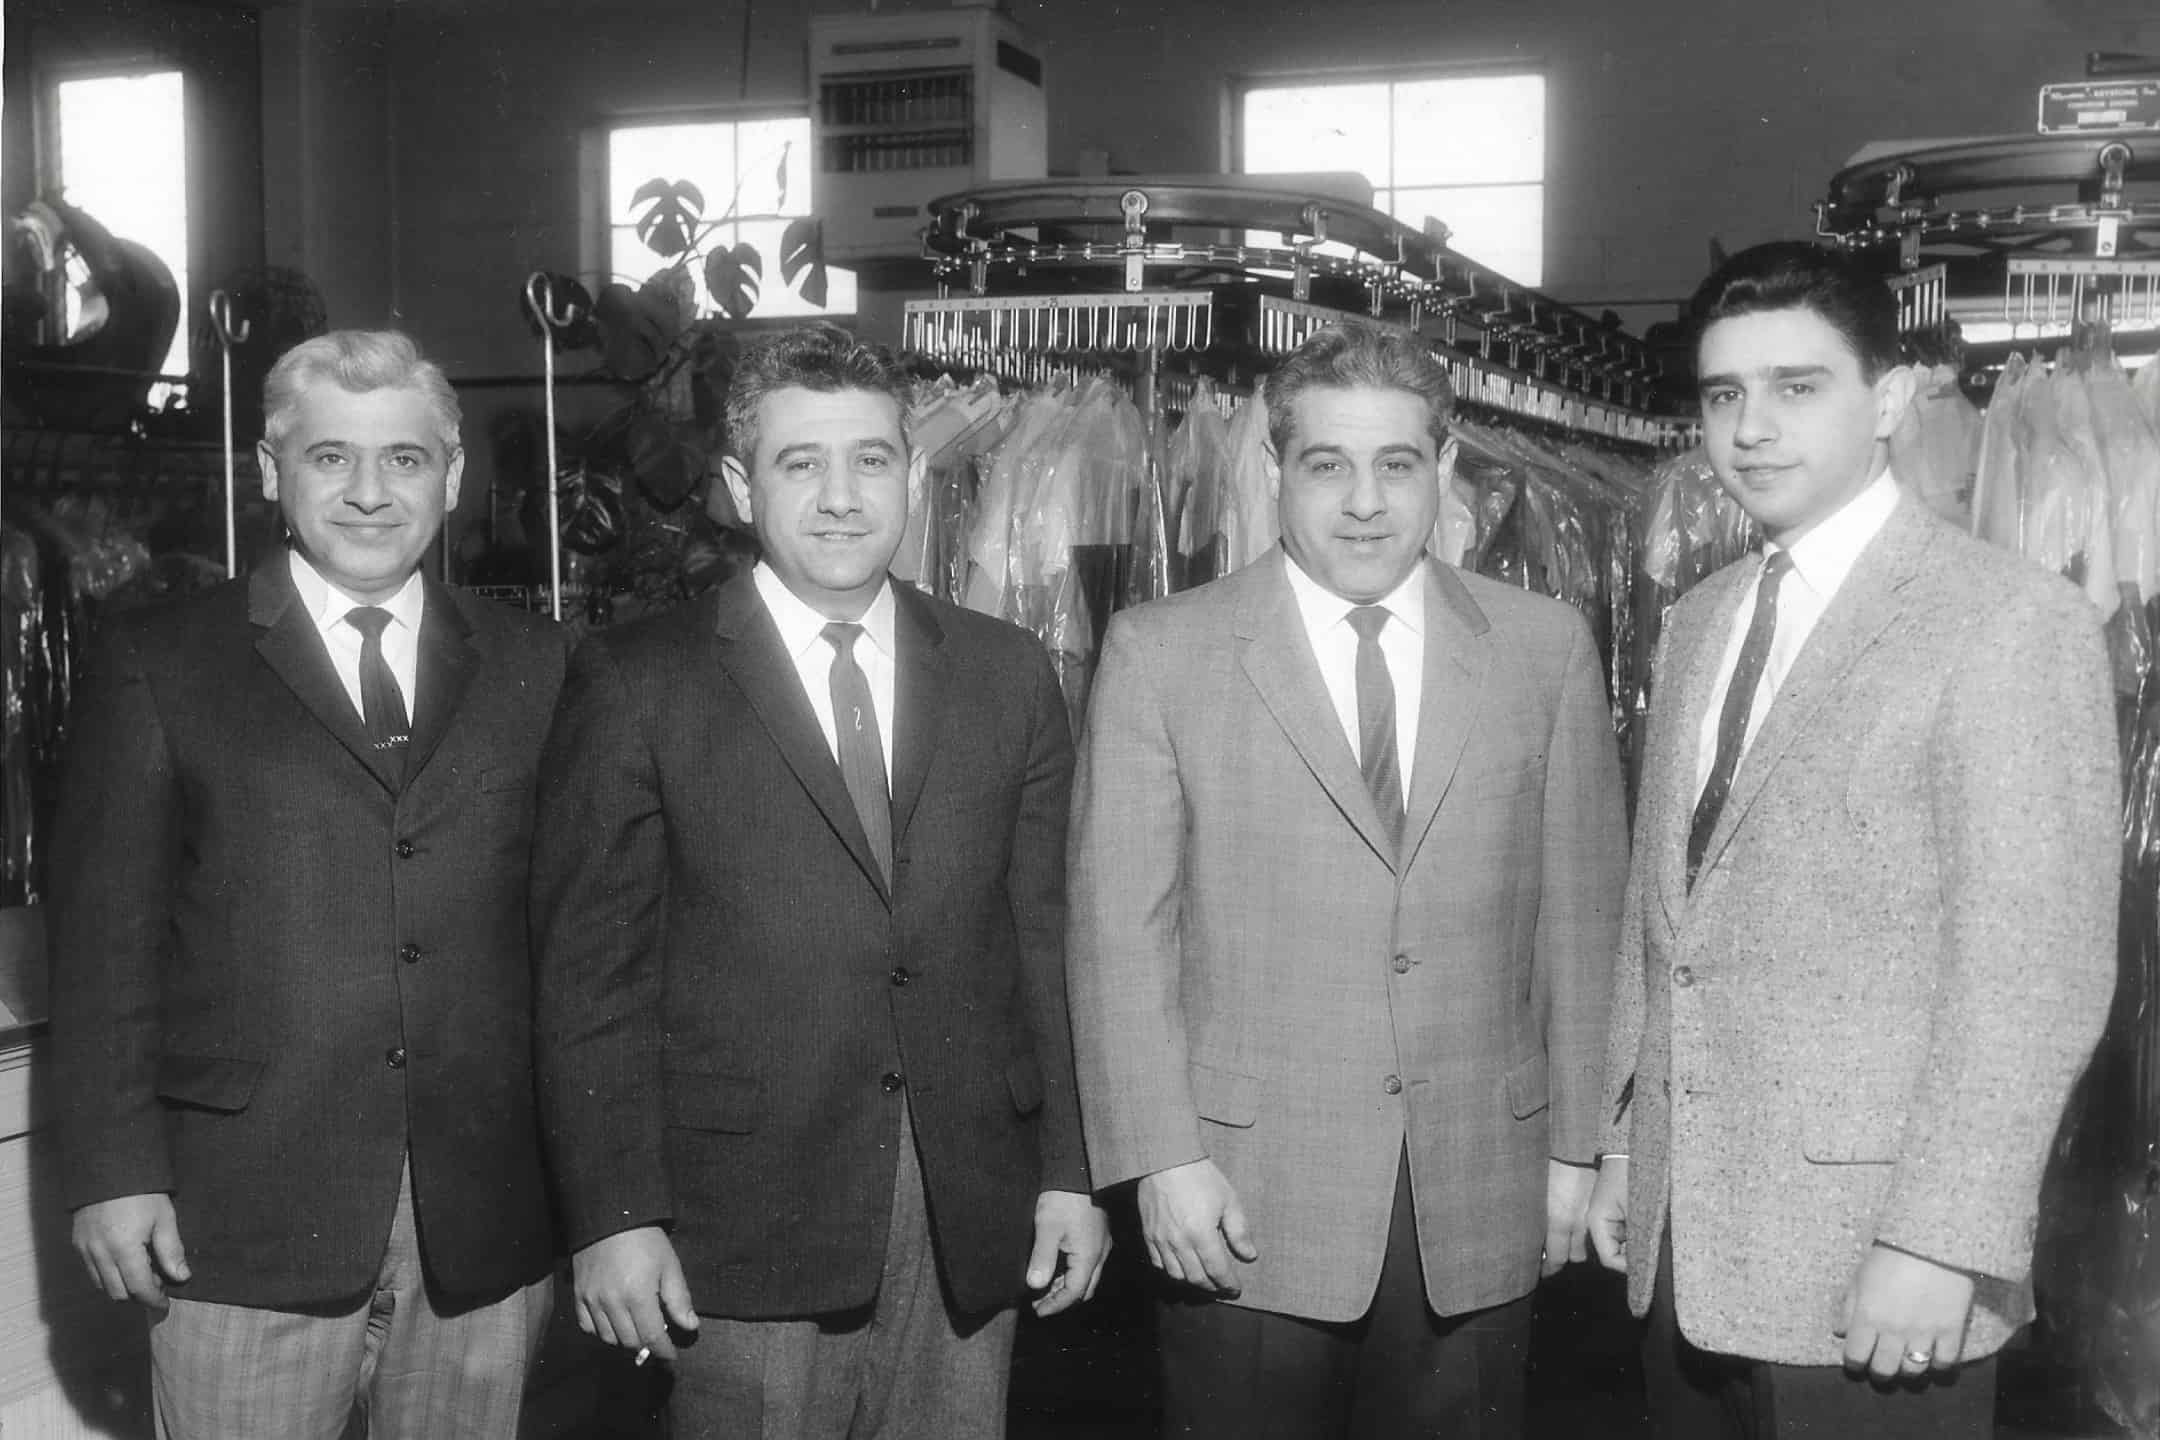 The founders of Julian's Dry Cleaners